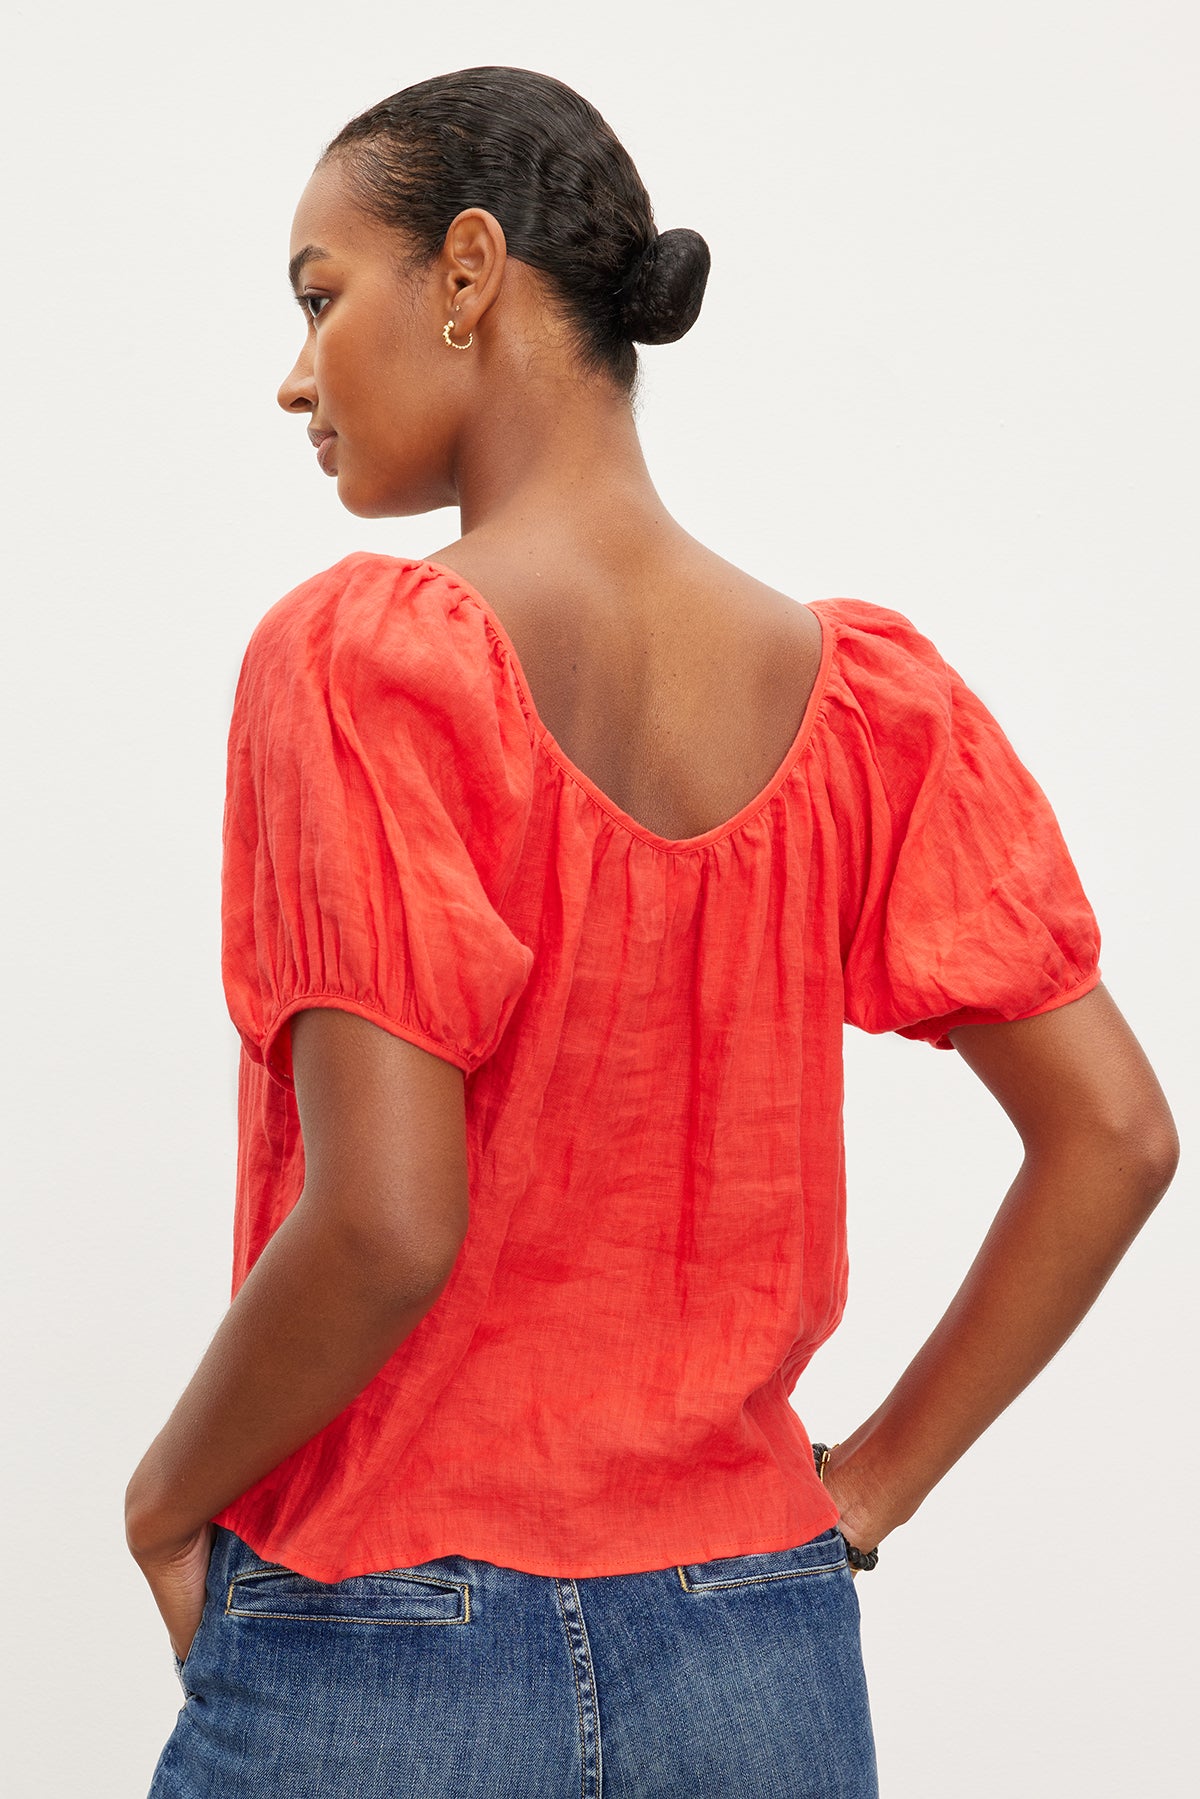   The back view of a woman wearing a Velvet by Graham & Spencer DANA LINEN SCOOP NECK TOP and jeans. 